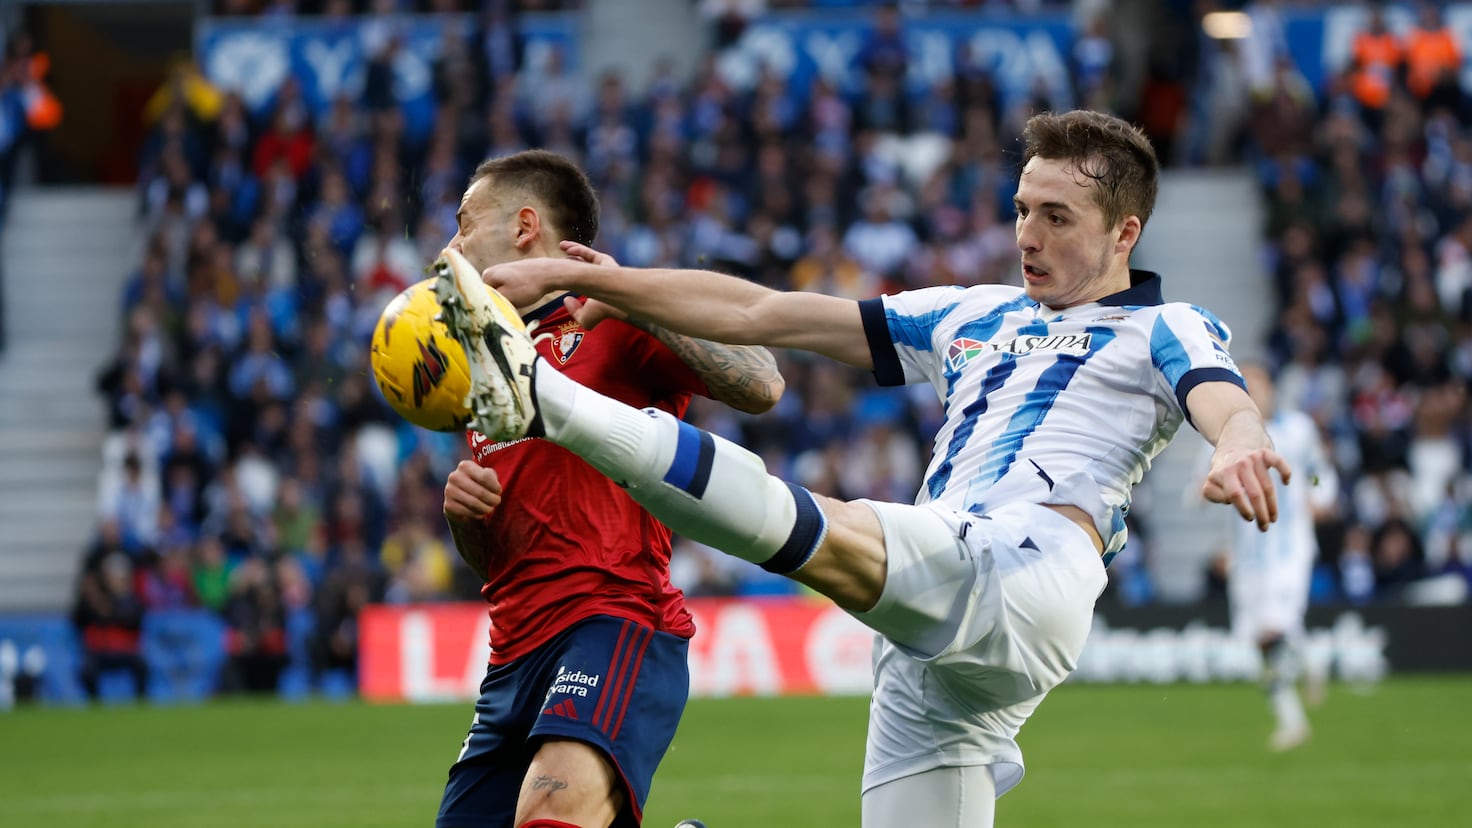 Le Normand’s Departure: Real Sociedad Bets on Homegrown Talent